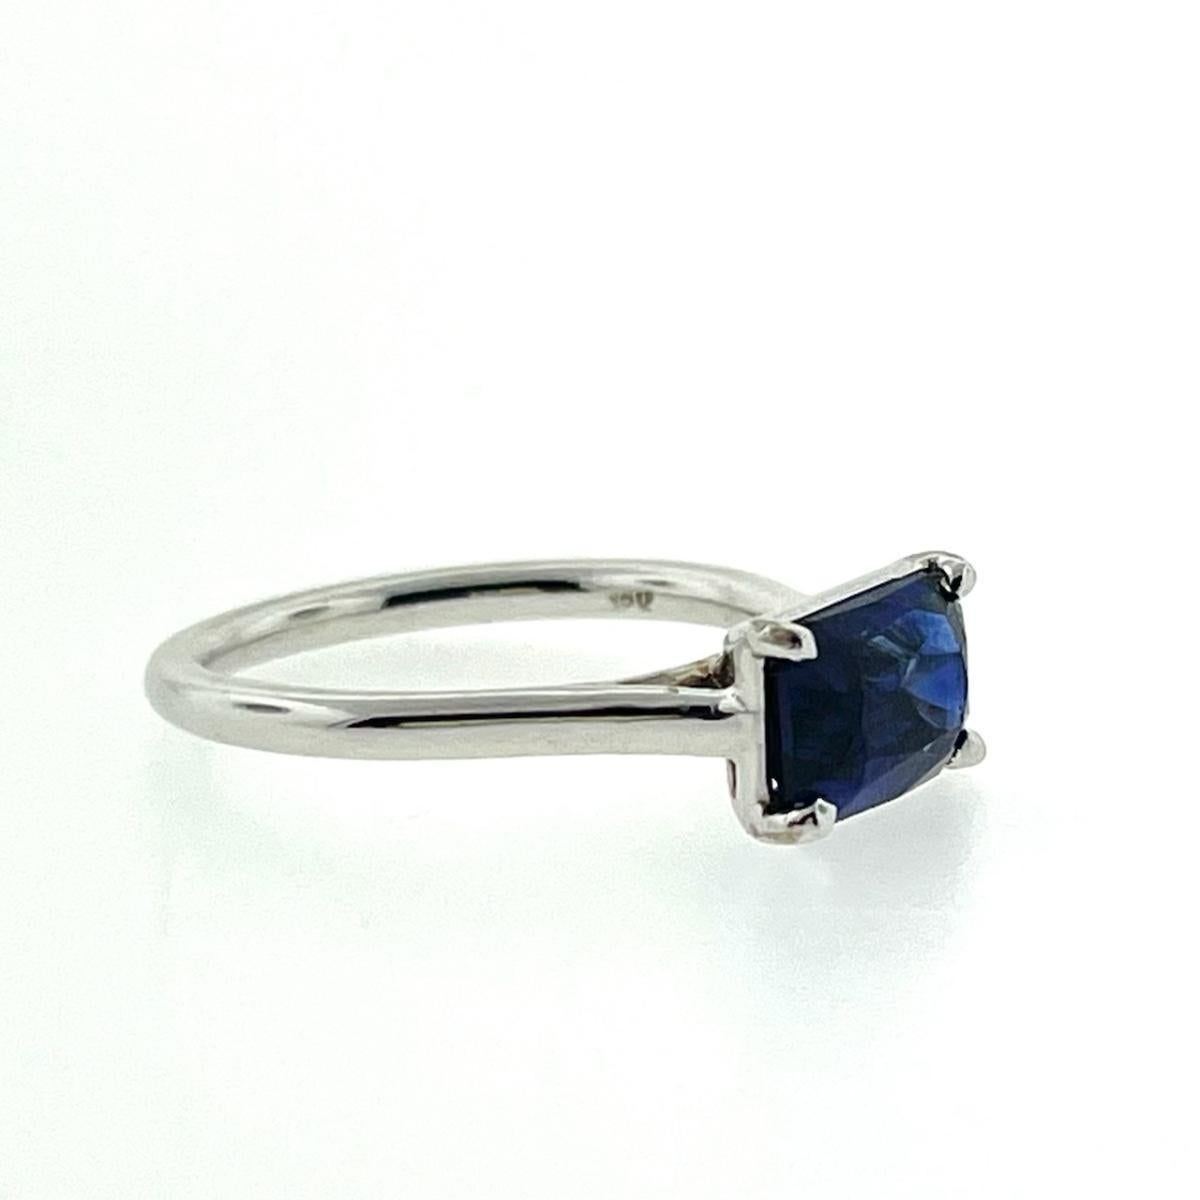 Single Emerald Cut Blue Sapphire weighing 2.33cts Set in a 18K White Gold Ring. The ring is currently a size 6 but can be resized. 
